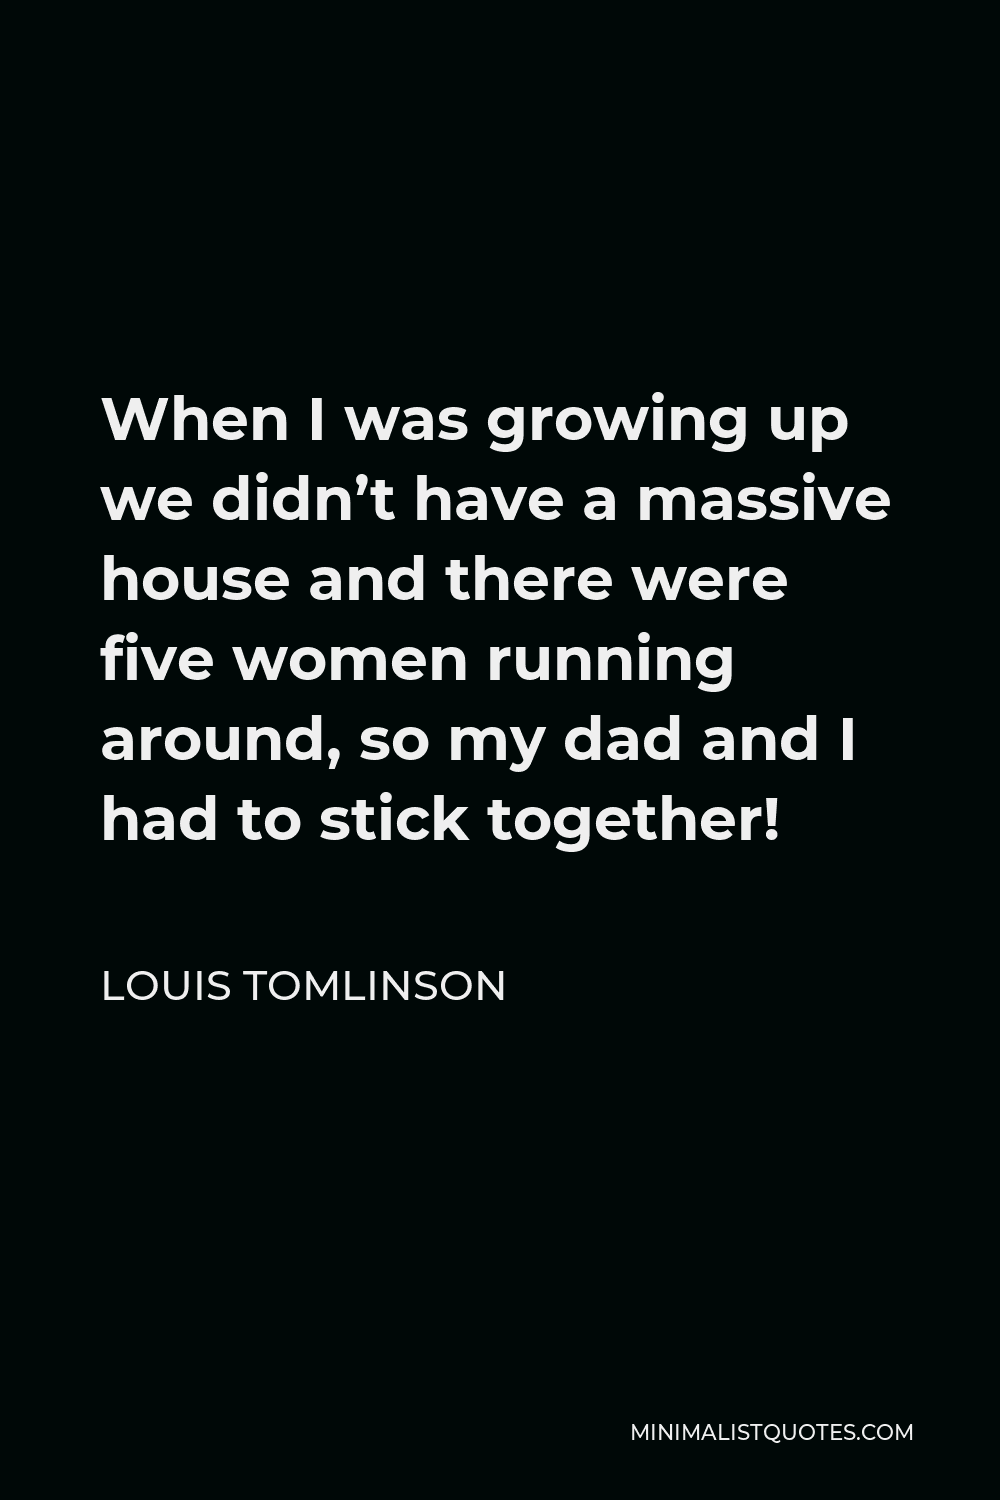 Louis Tomlinson Quote - When I was growing up we didn’t have a massive house and there were five women running around, so my dad and I had to stick together!